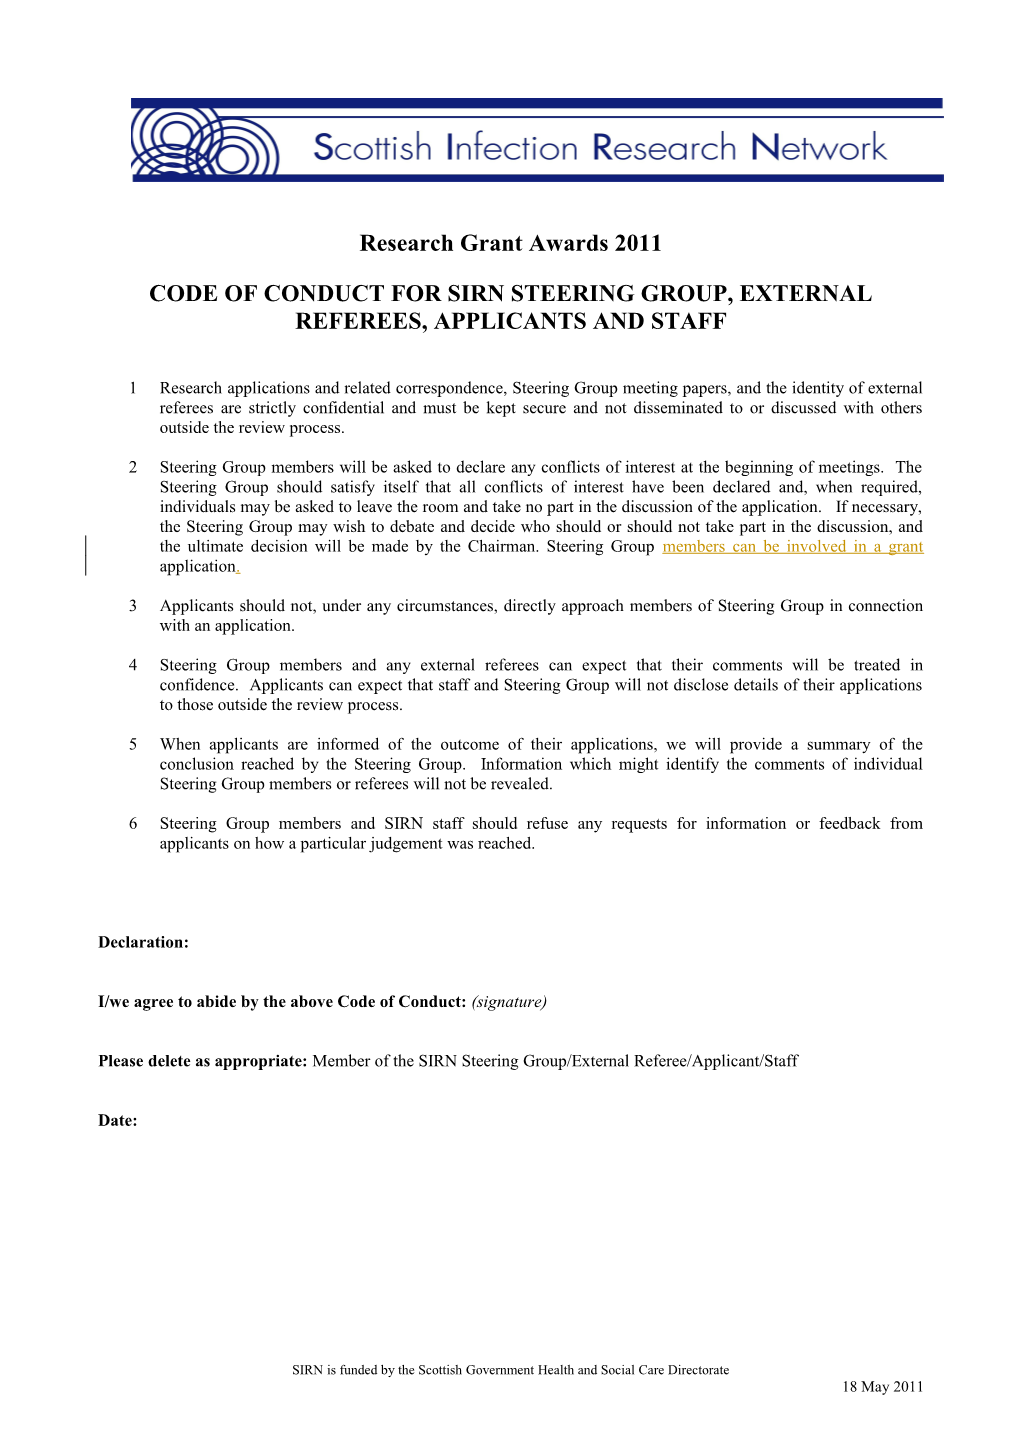 Code of Conduct for Scientific Advisers, External Referees, Applicants and Staff of The